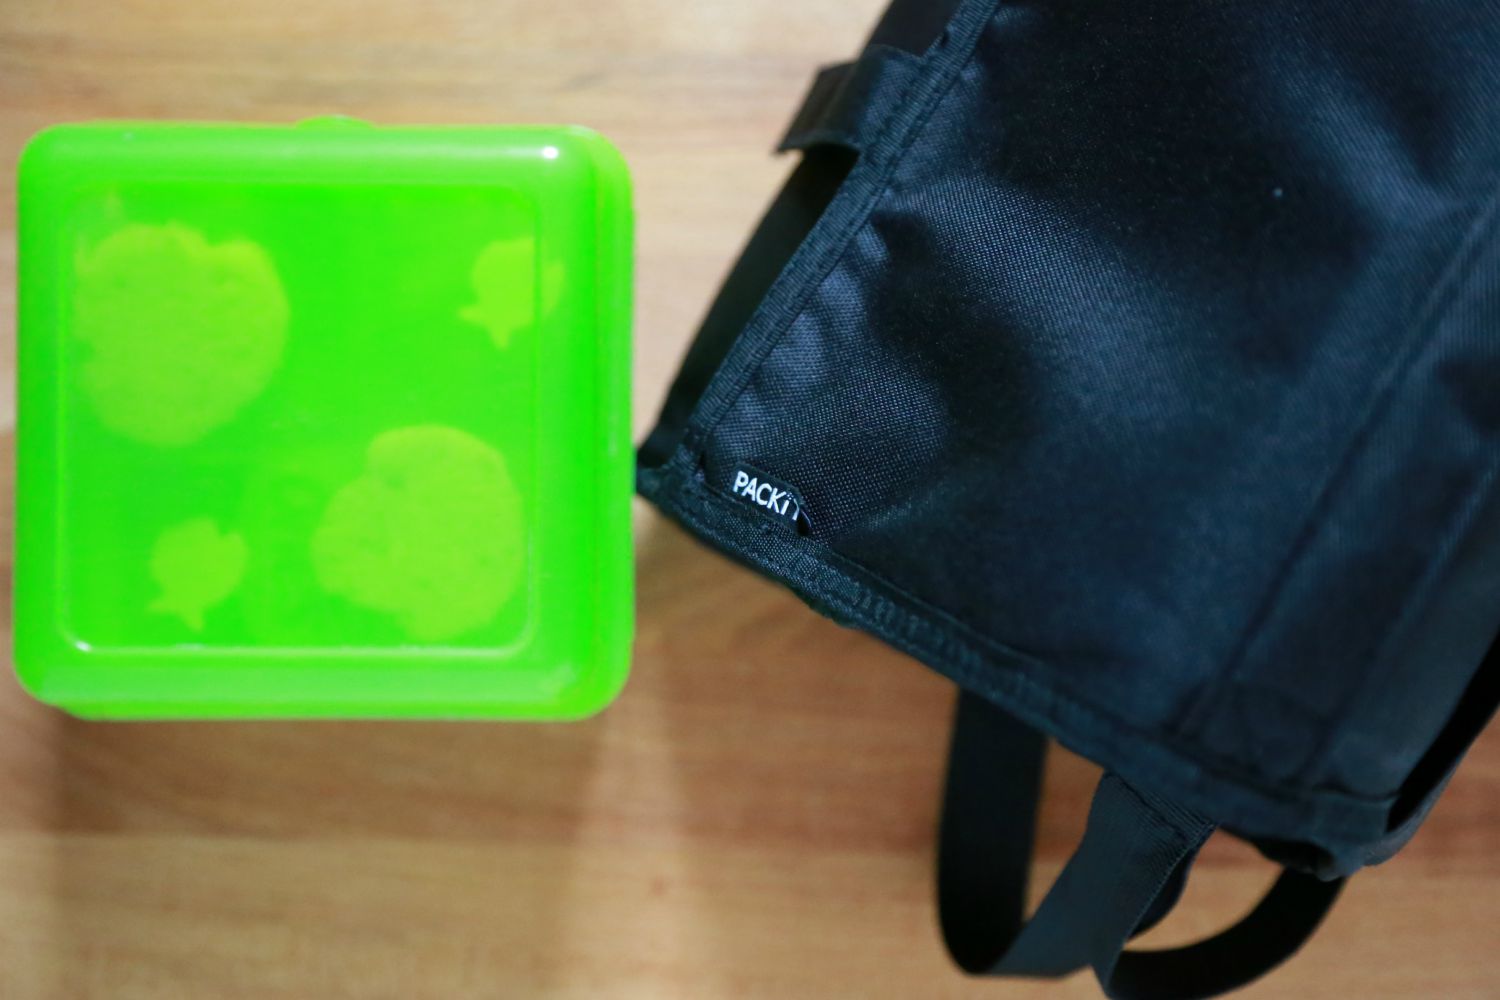 Packit Freezable Lunch Bag Review